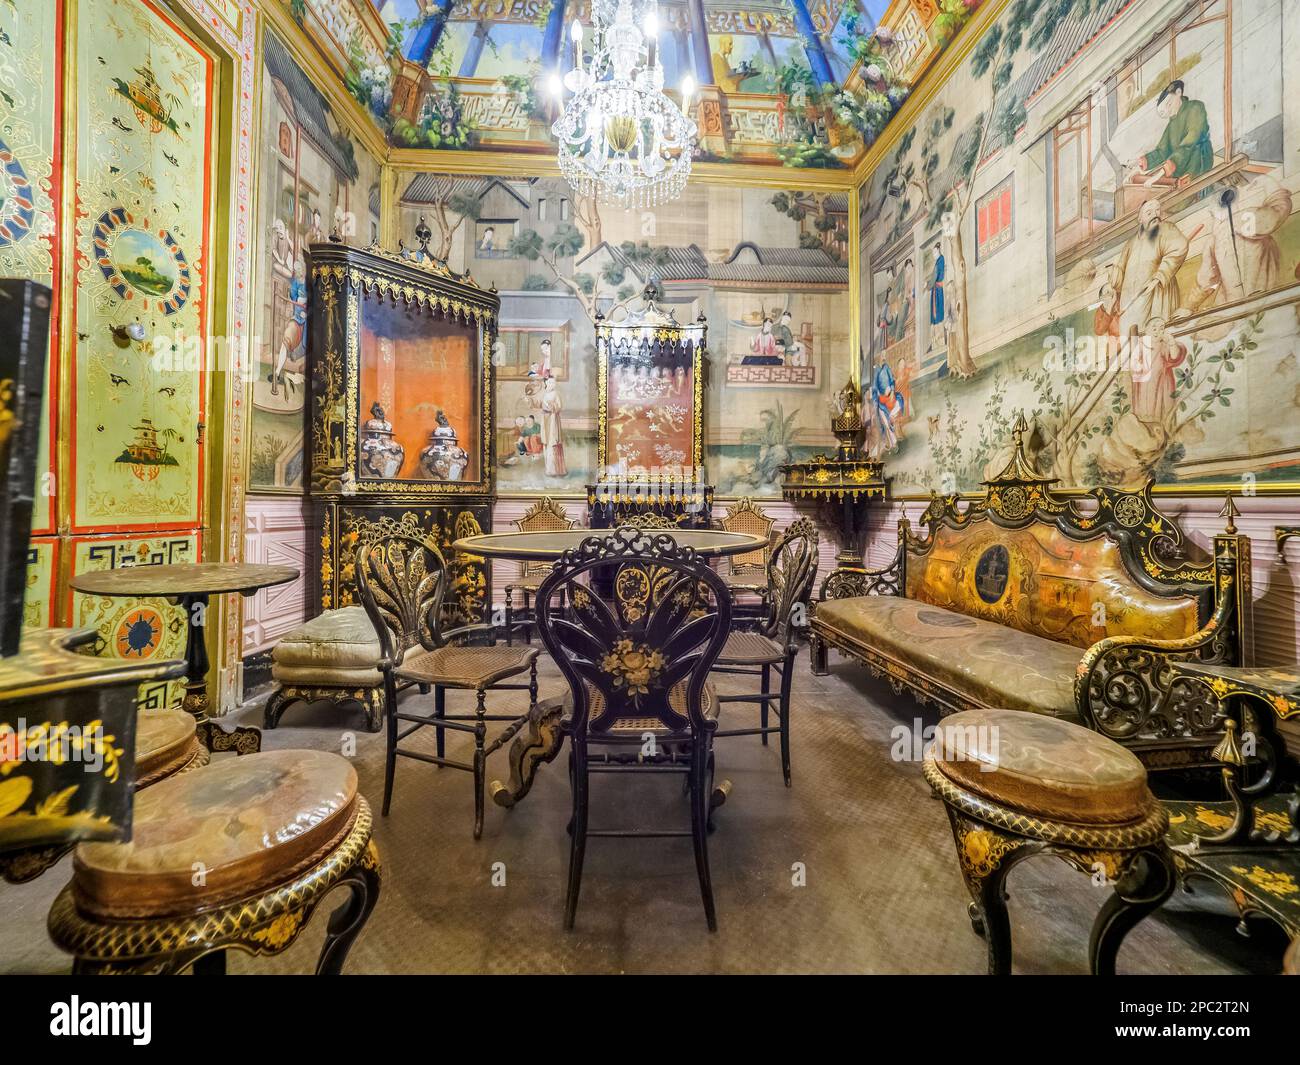 Salottino cinese (Chinese parlor) in the Filangeri-Cutò aristocratic baroque style palace also known as Palazzo Mirto - Palermo, Sicily, Italy Stock Photo